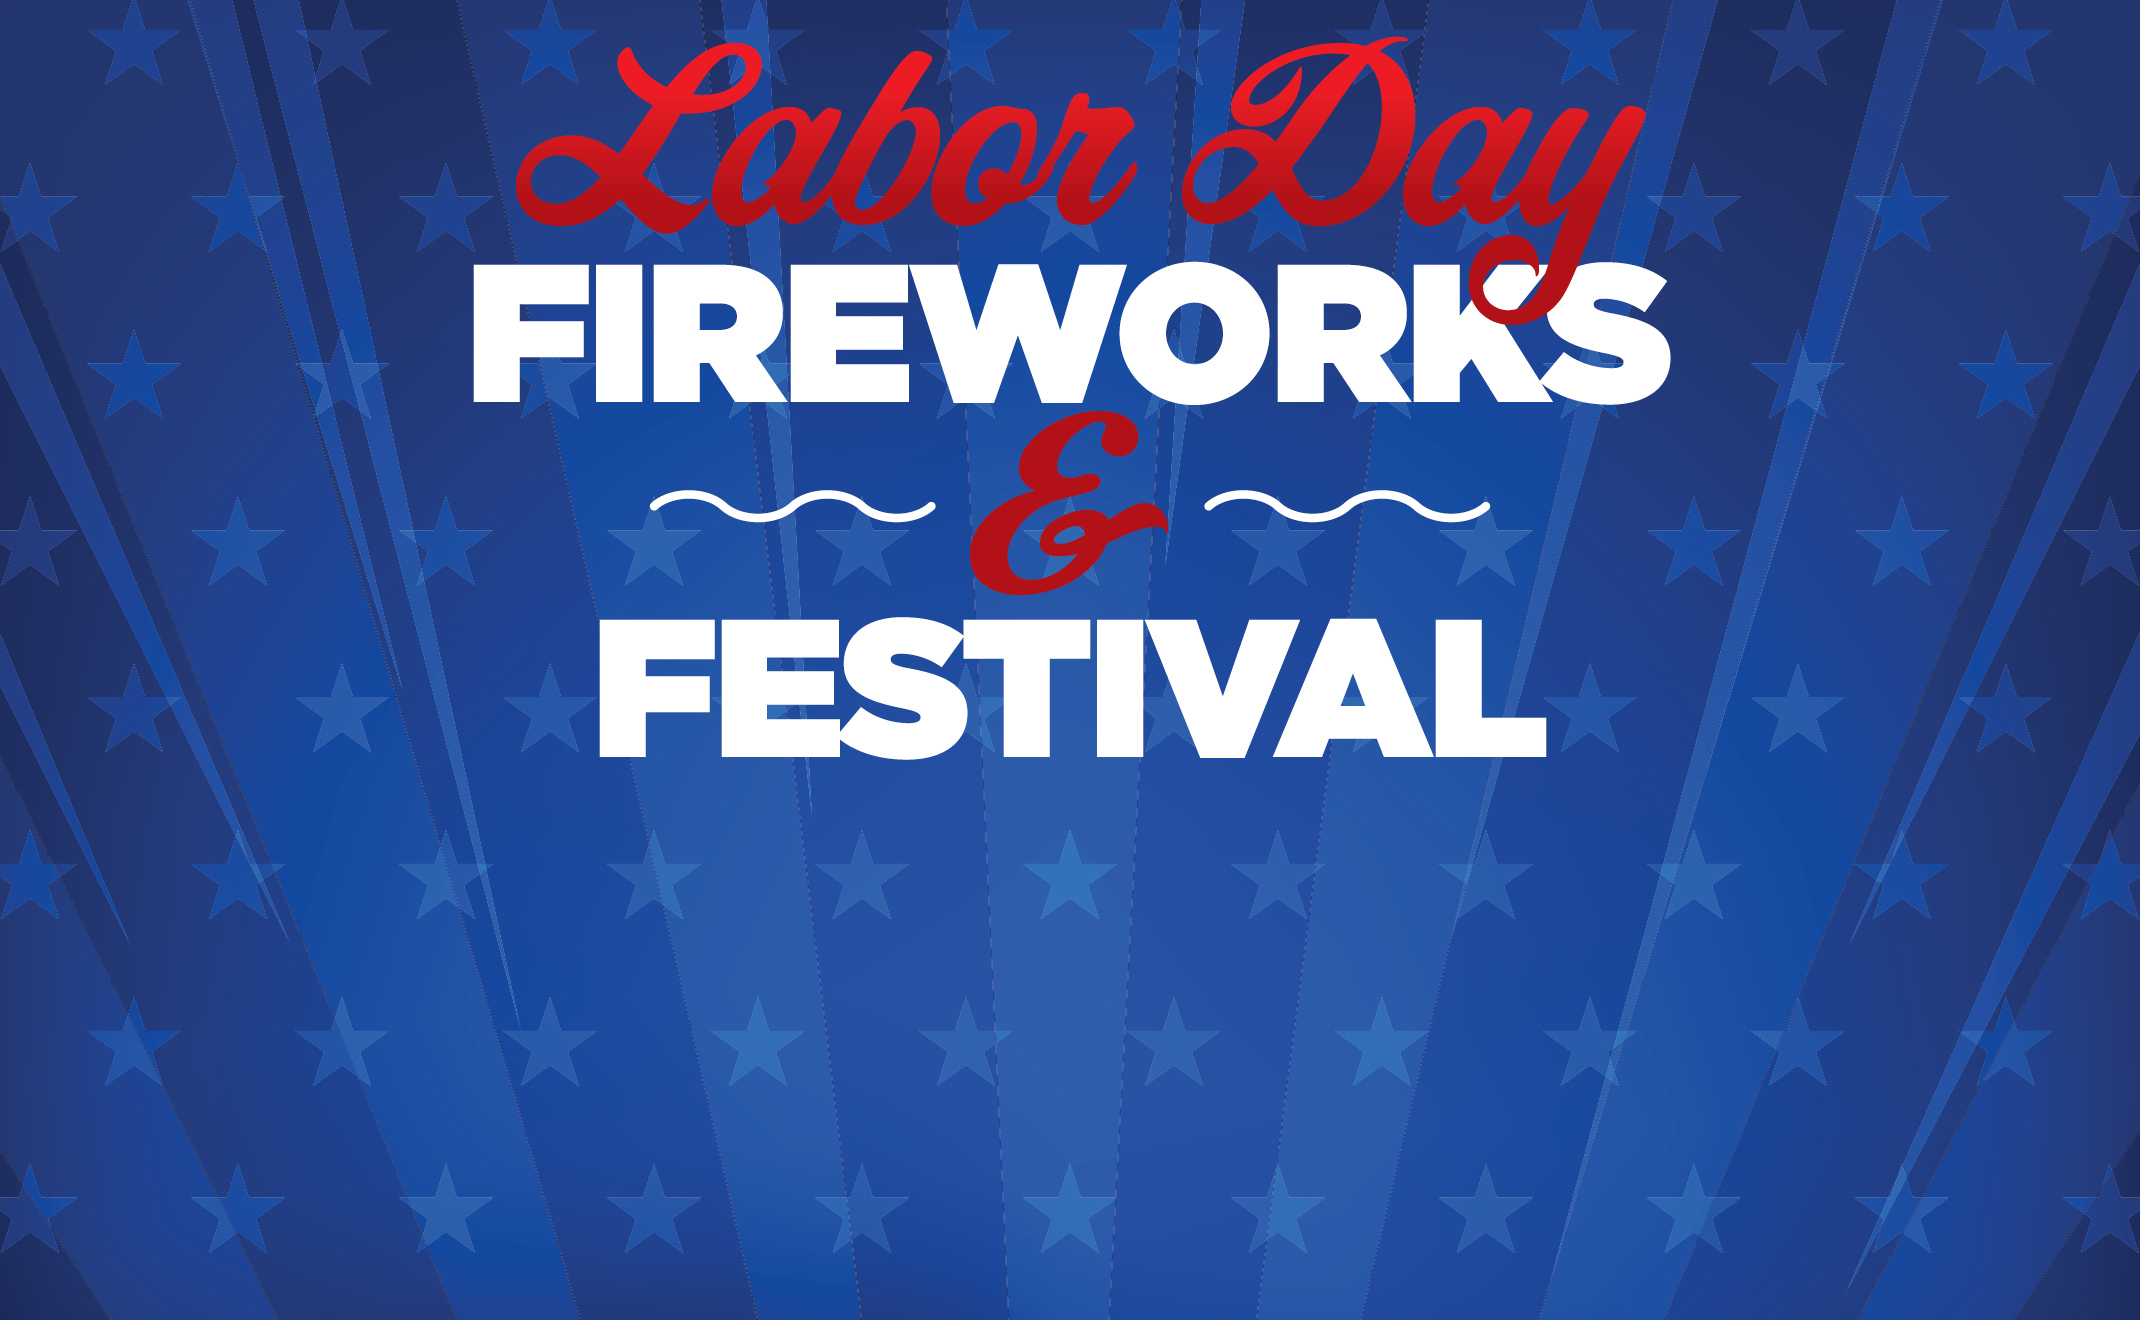 rivers casino 4th of july events